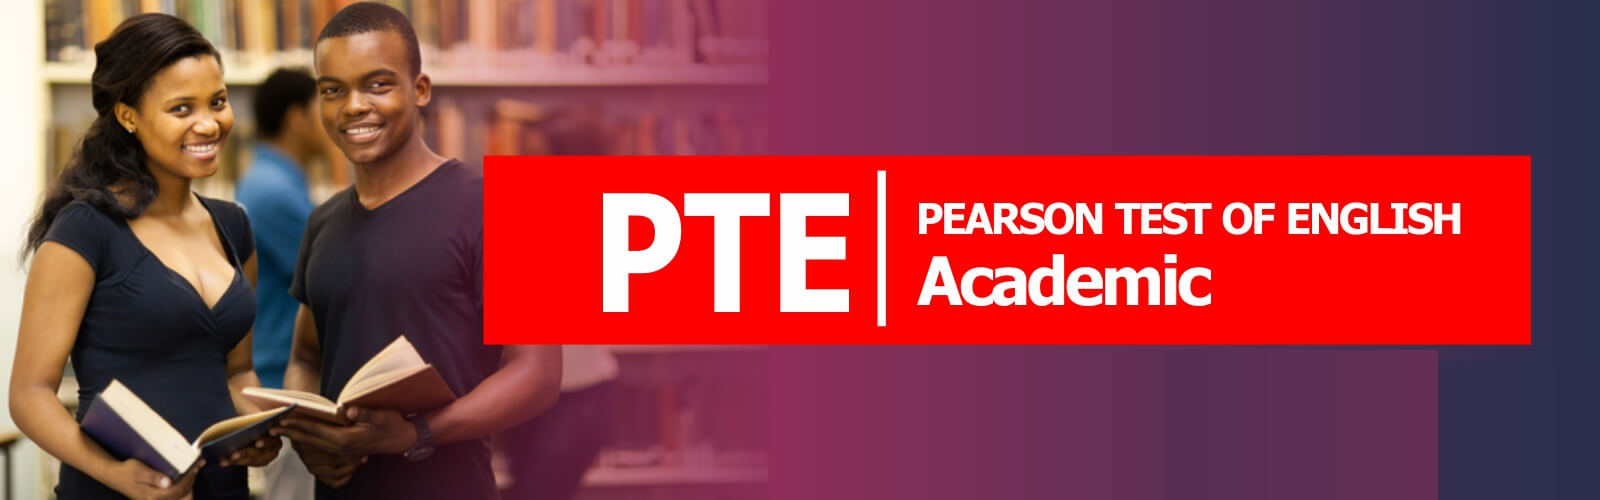 PEARSON TEST OF ENGLISH ACADEMIC